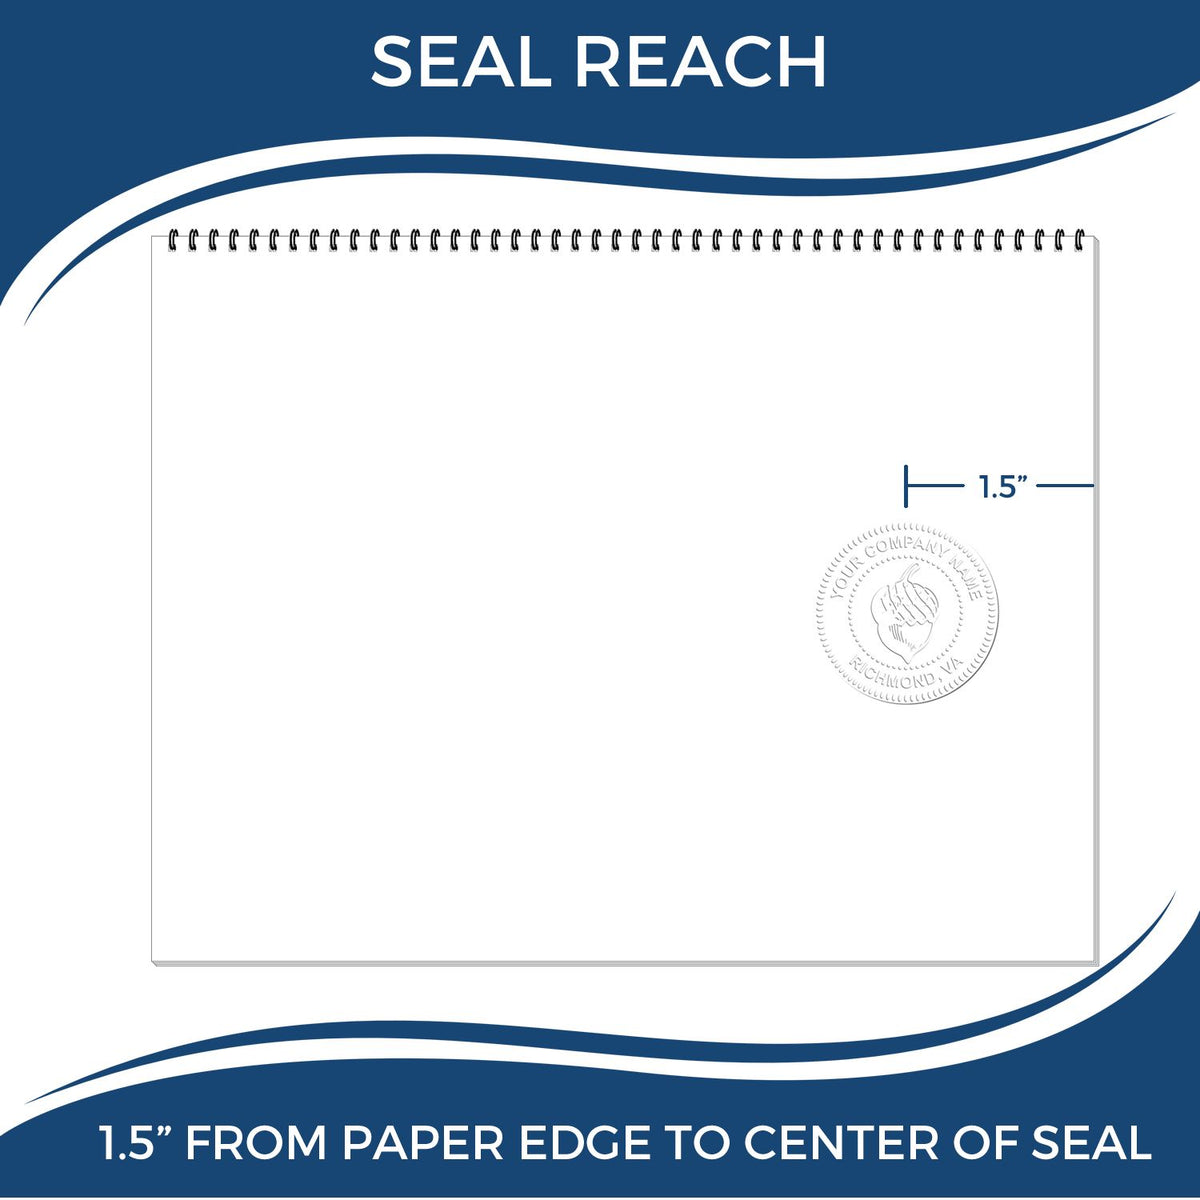 An infographic showing the seal reach which is represented by a ruler and a miniature seal image of the Gift Wyoming Engineer Seal